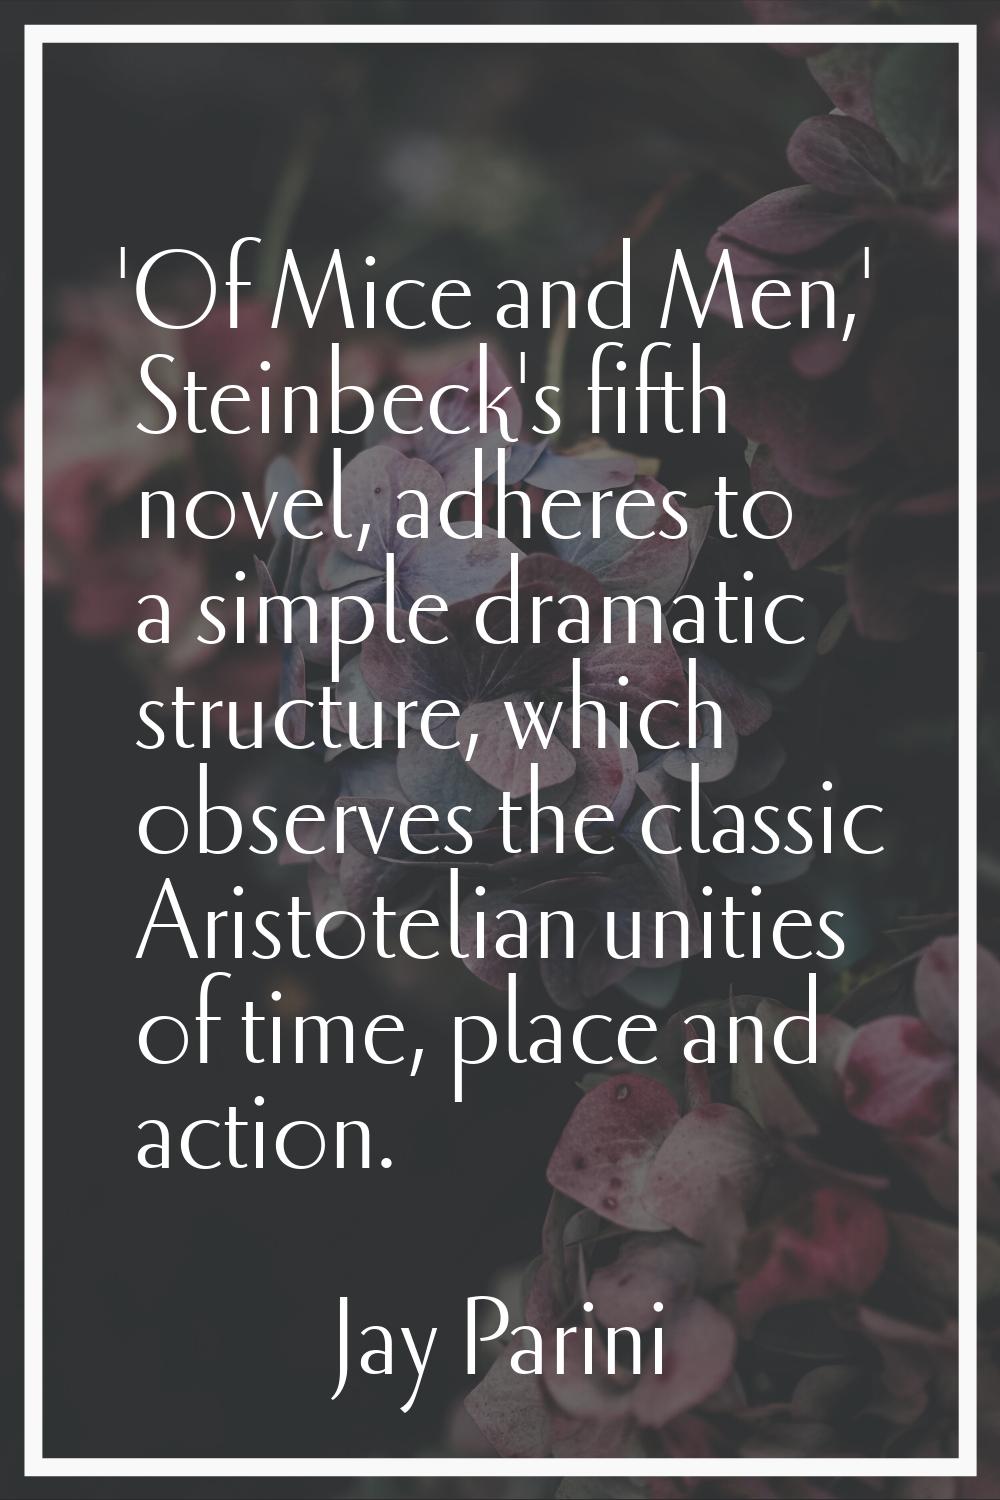 'Of Mice and Men,' Steinbeck's fifth novel, adheres to a simple dramatic structure, which observes 